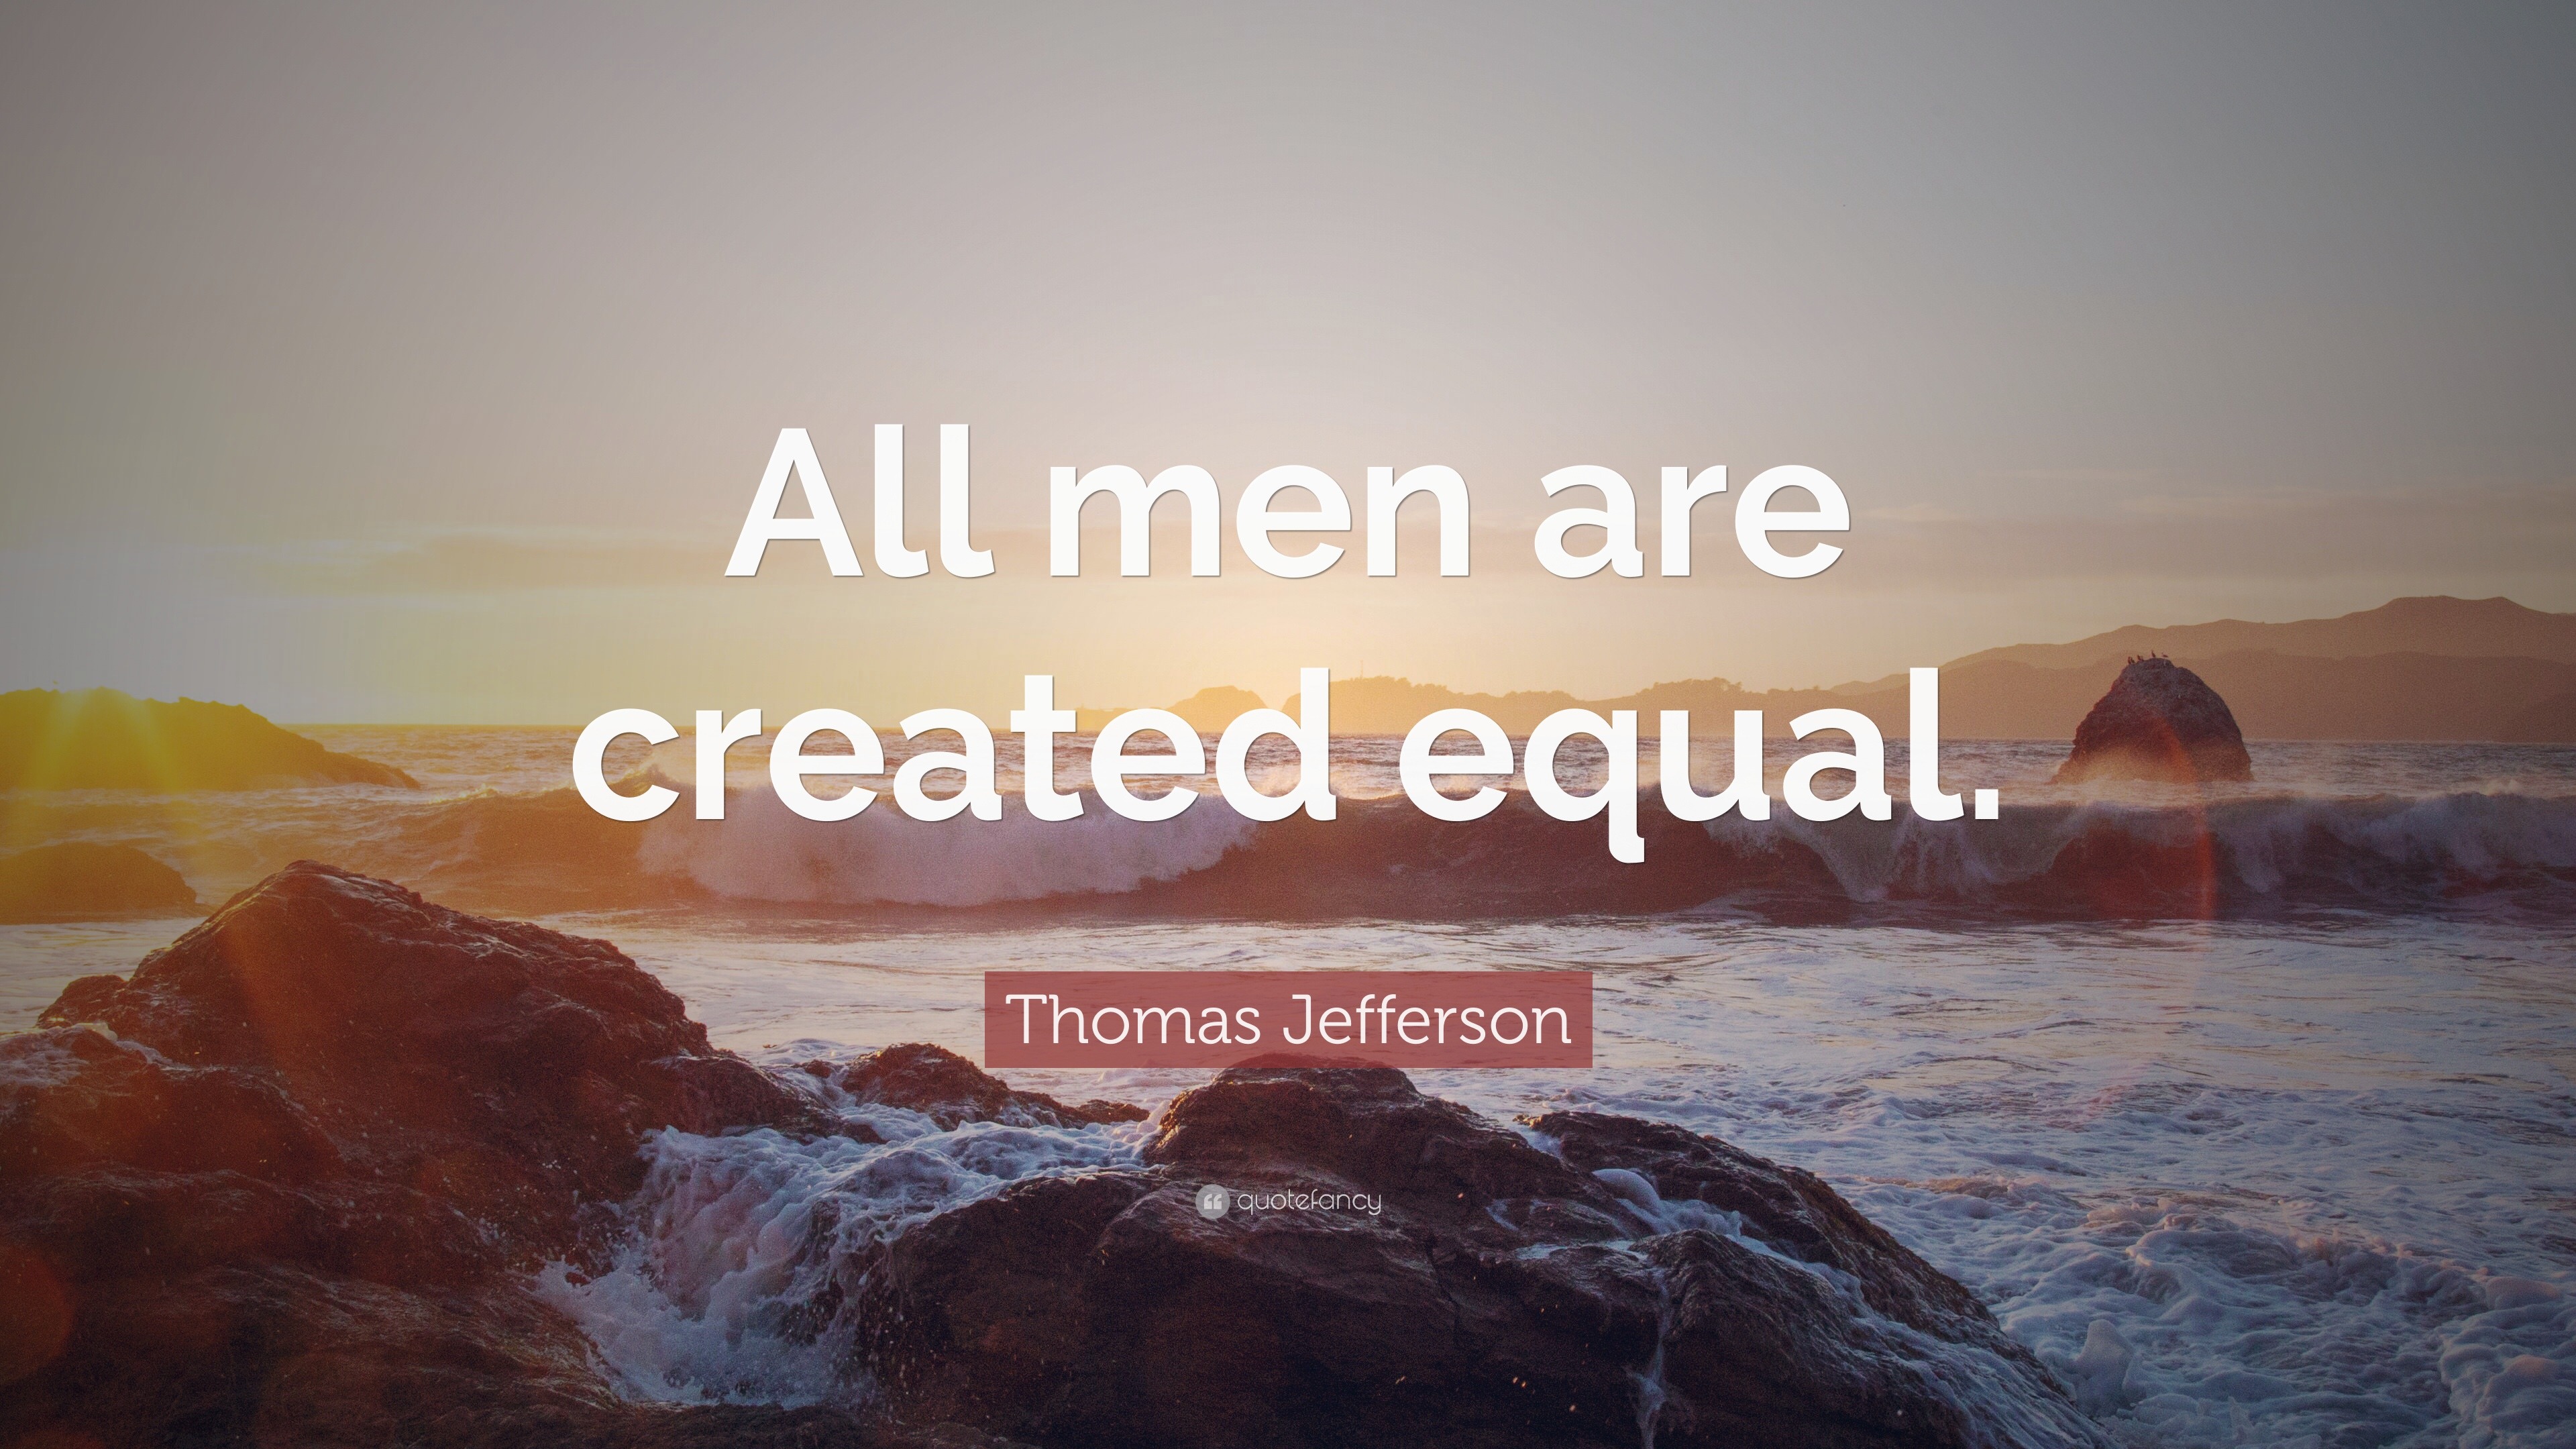 Thomas Jefferson Quote: “All men are created equal.”